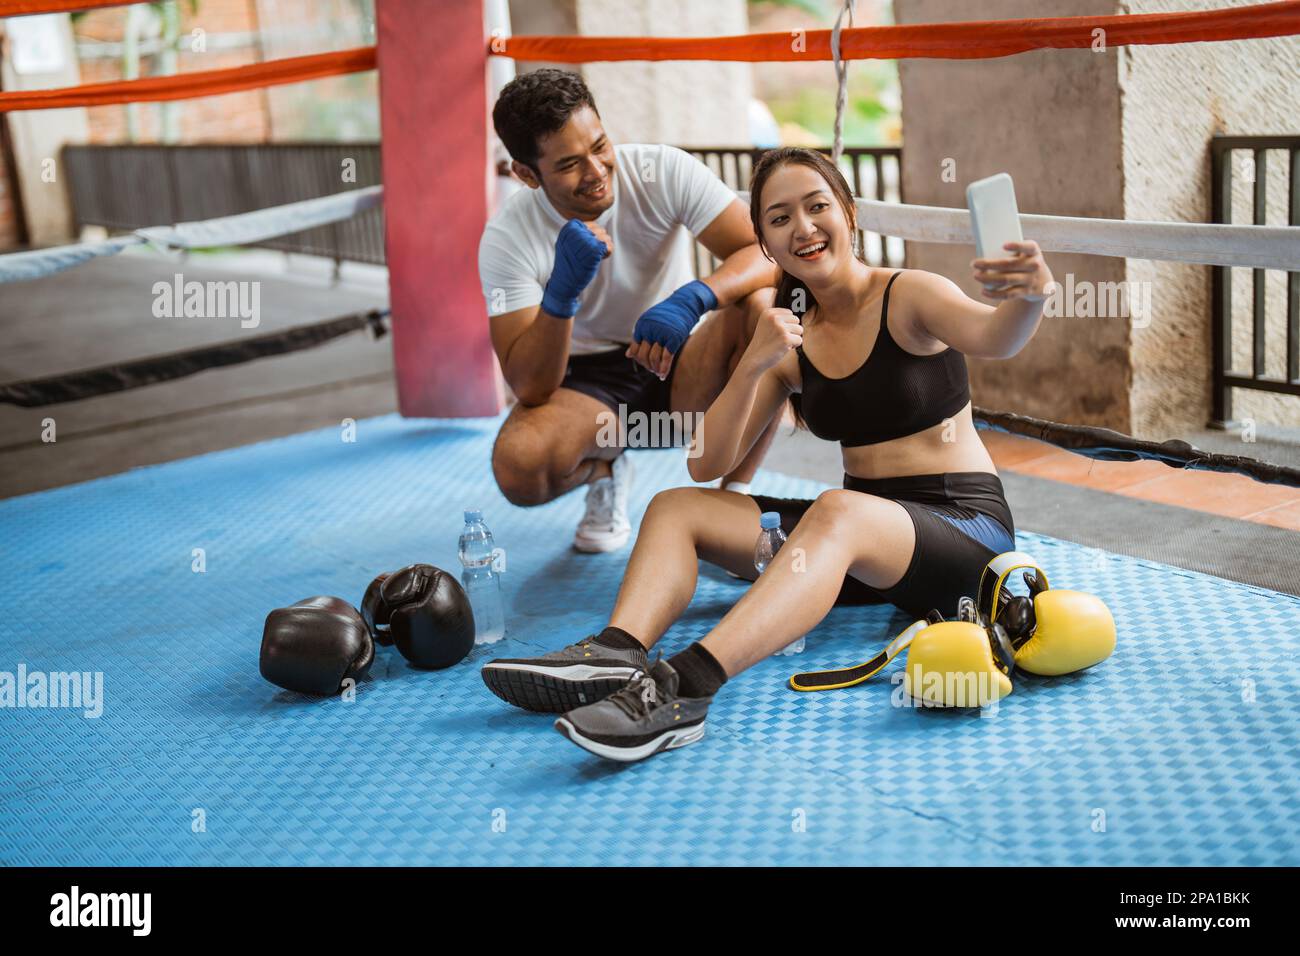 a female boxer and the male boxer taking groufie photo Stock Photo